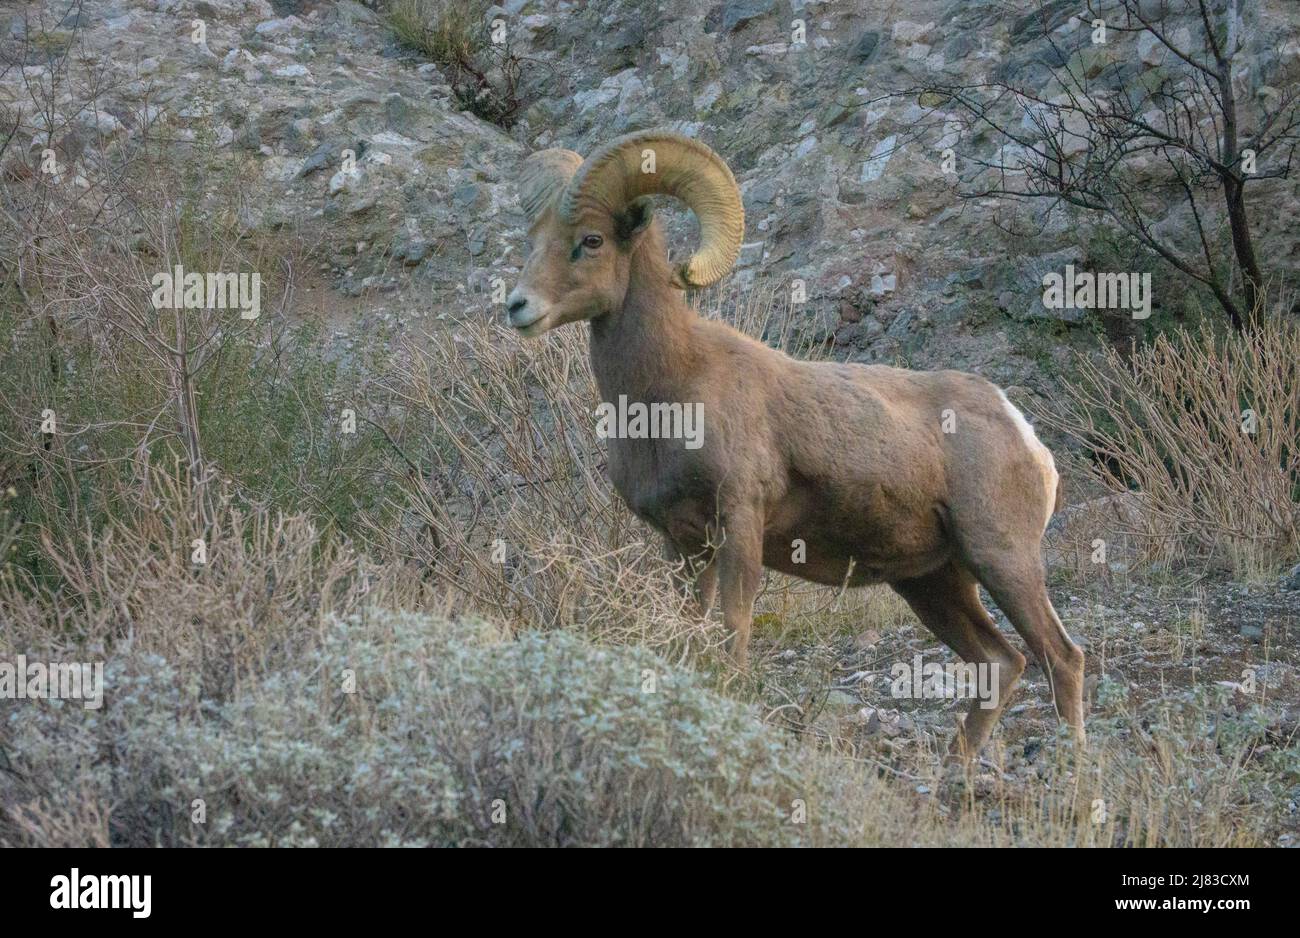 A young male bighorn sheep forage the high desert in winter at the Sand to Snow National Monument near Palm Springs, California. Stock Photo